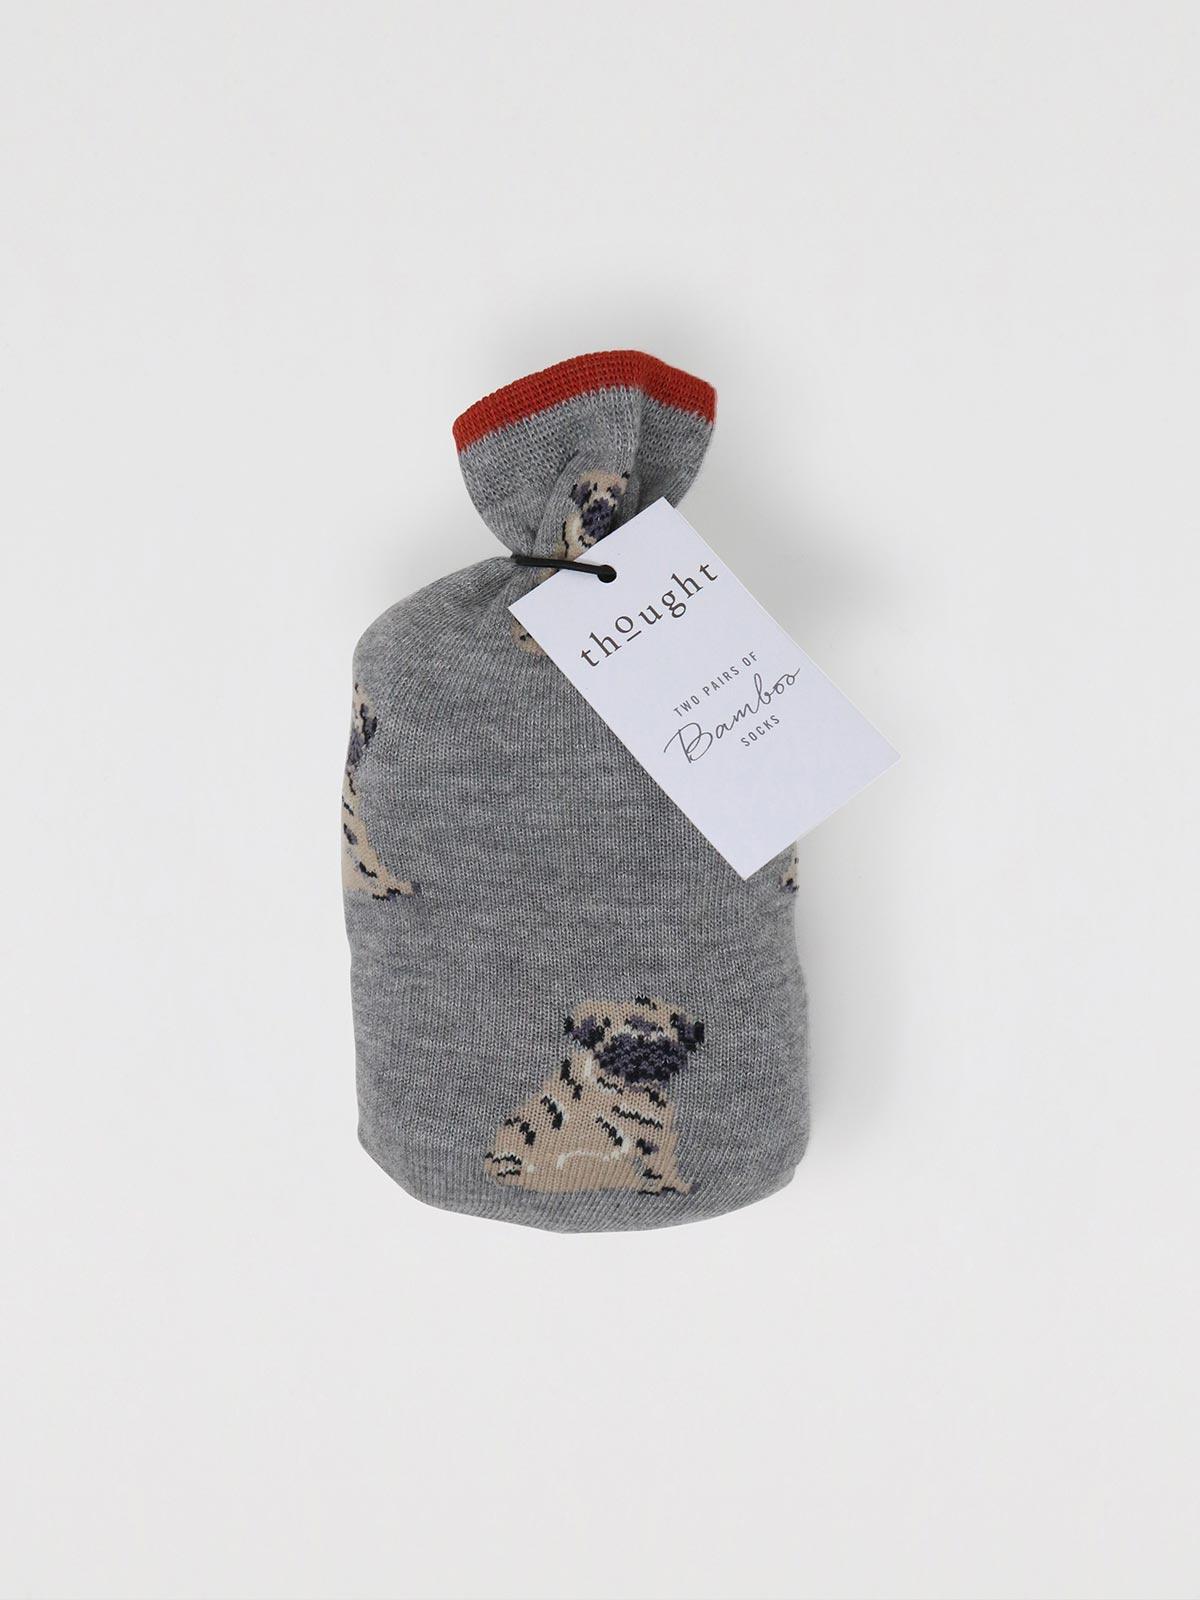 Wiley Pug Socks In A Bag - Multi - Thought Clothing UK